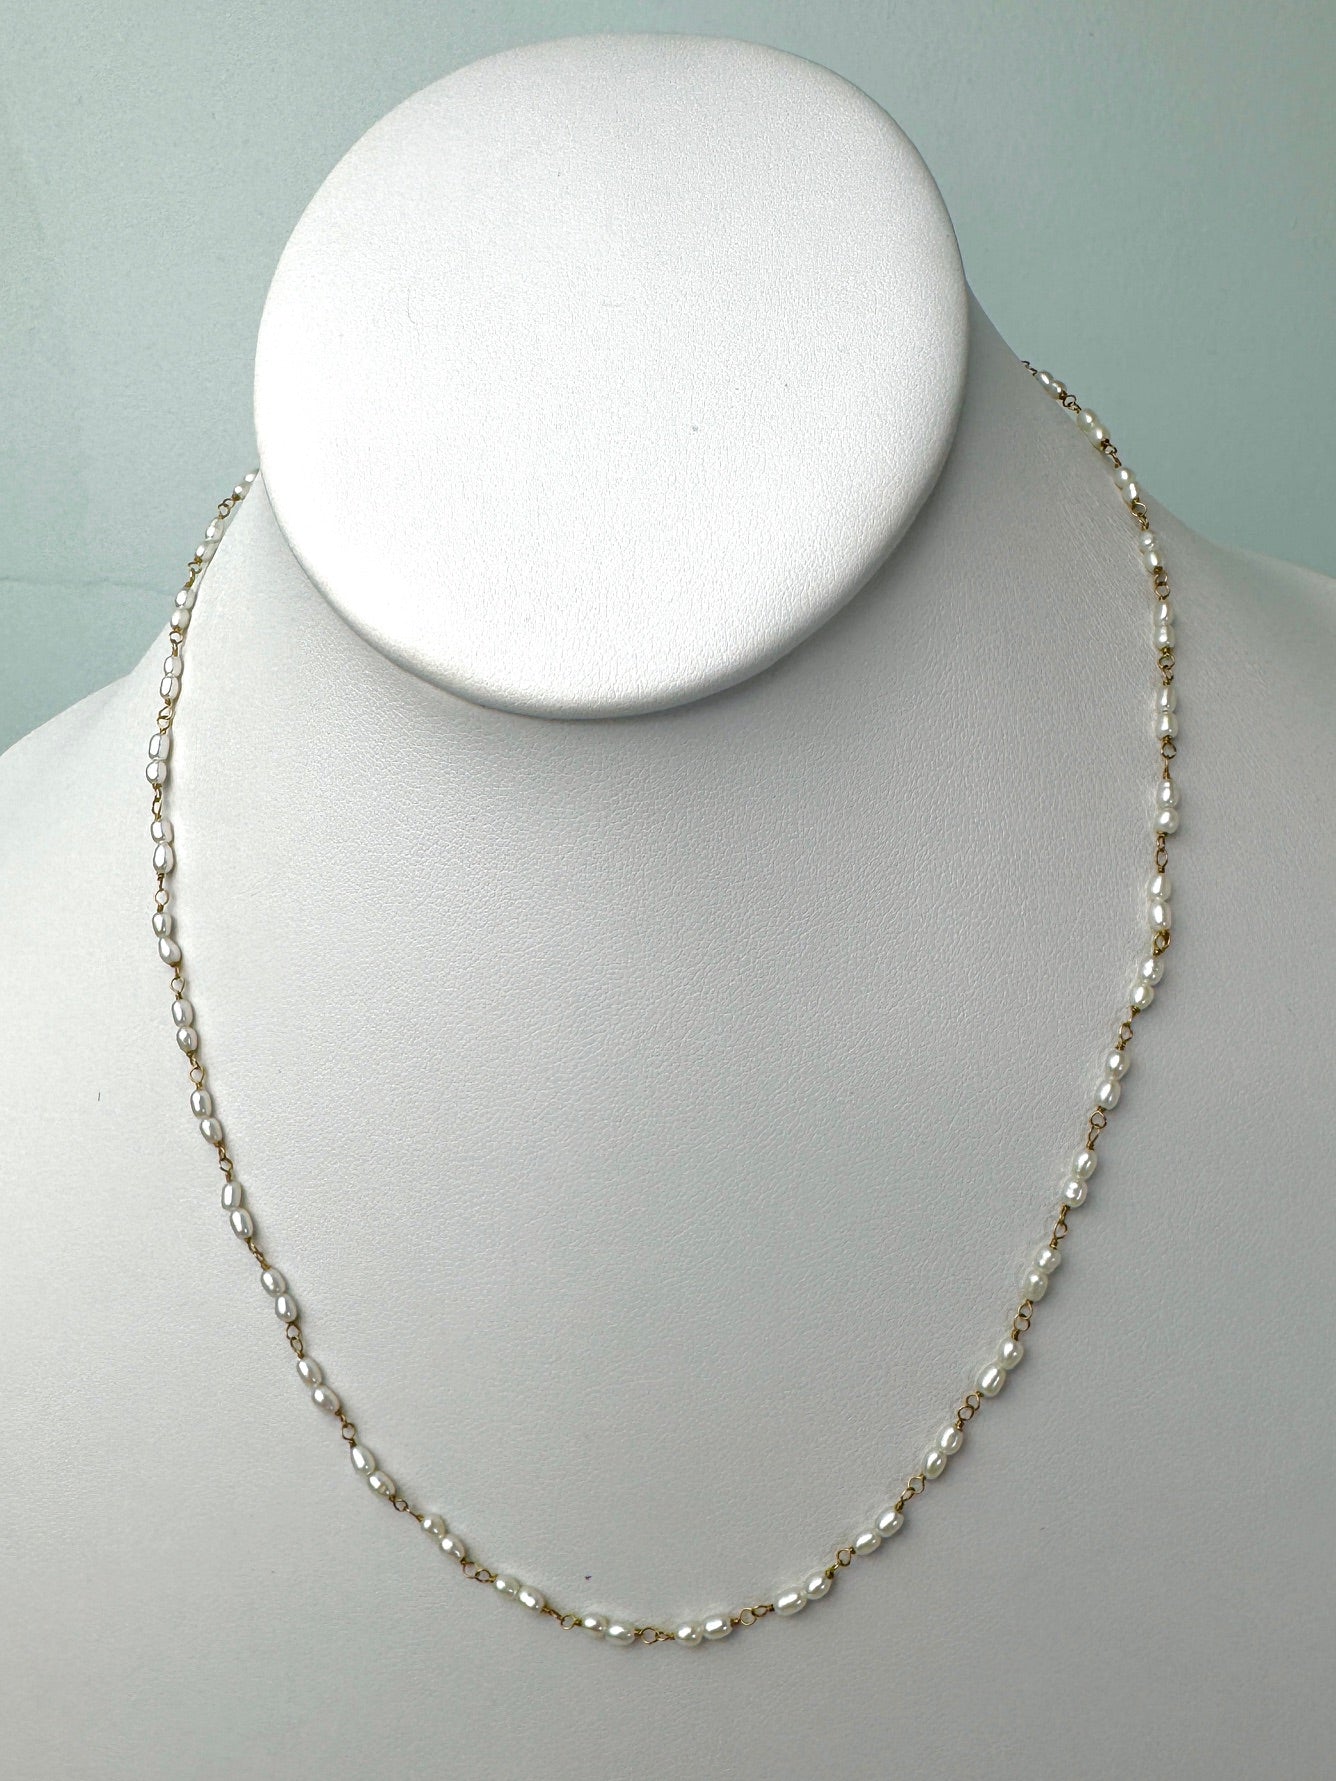 18"- 36" Double Keshi Pearl Rosary Necklace in18KY - NCK-204-ROSPRL18Y-WH-18